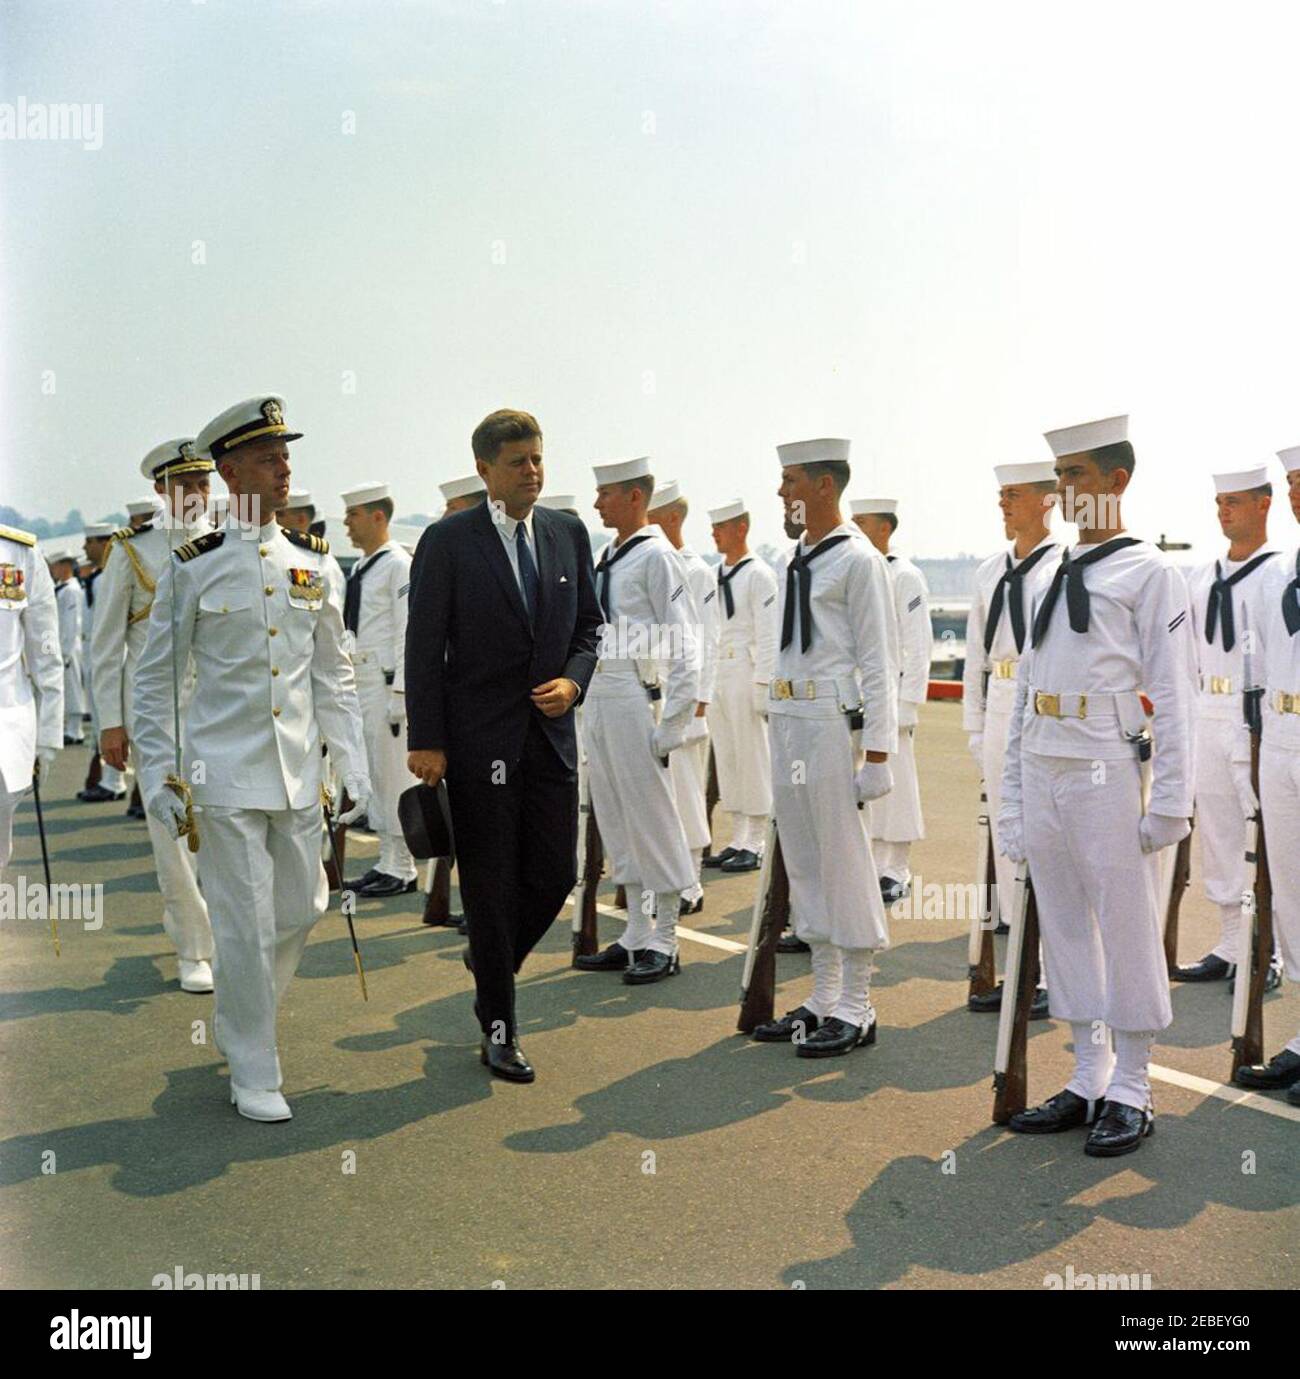 Commencement Address at the US Naval Academy, Annapolis, Maryland, 11:04AM. President John F. Kennedy en route to the commencement ceremony at the United States Naval Academy, Annapolis, Maryland. Also included in the photograph are Naval Aide to the President Tazewell T. Shepard and the United States Navy Honor Guard. Stock Photo